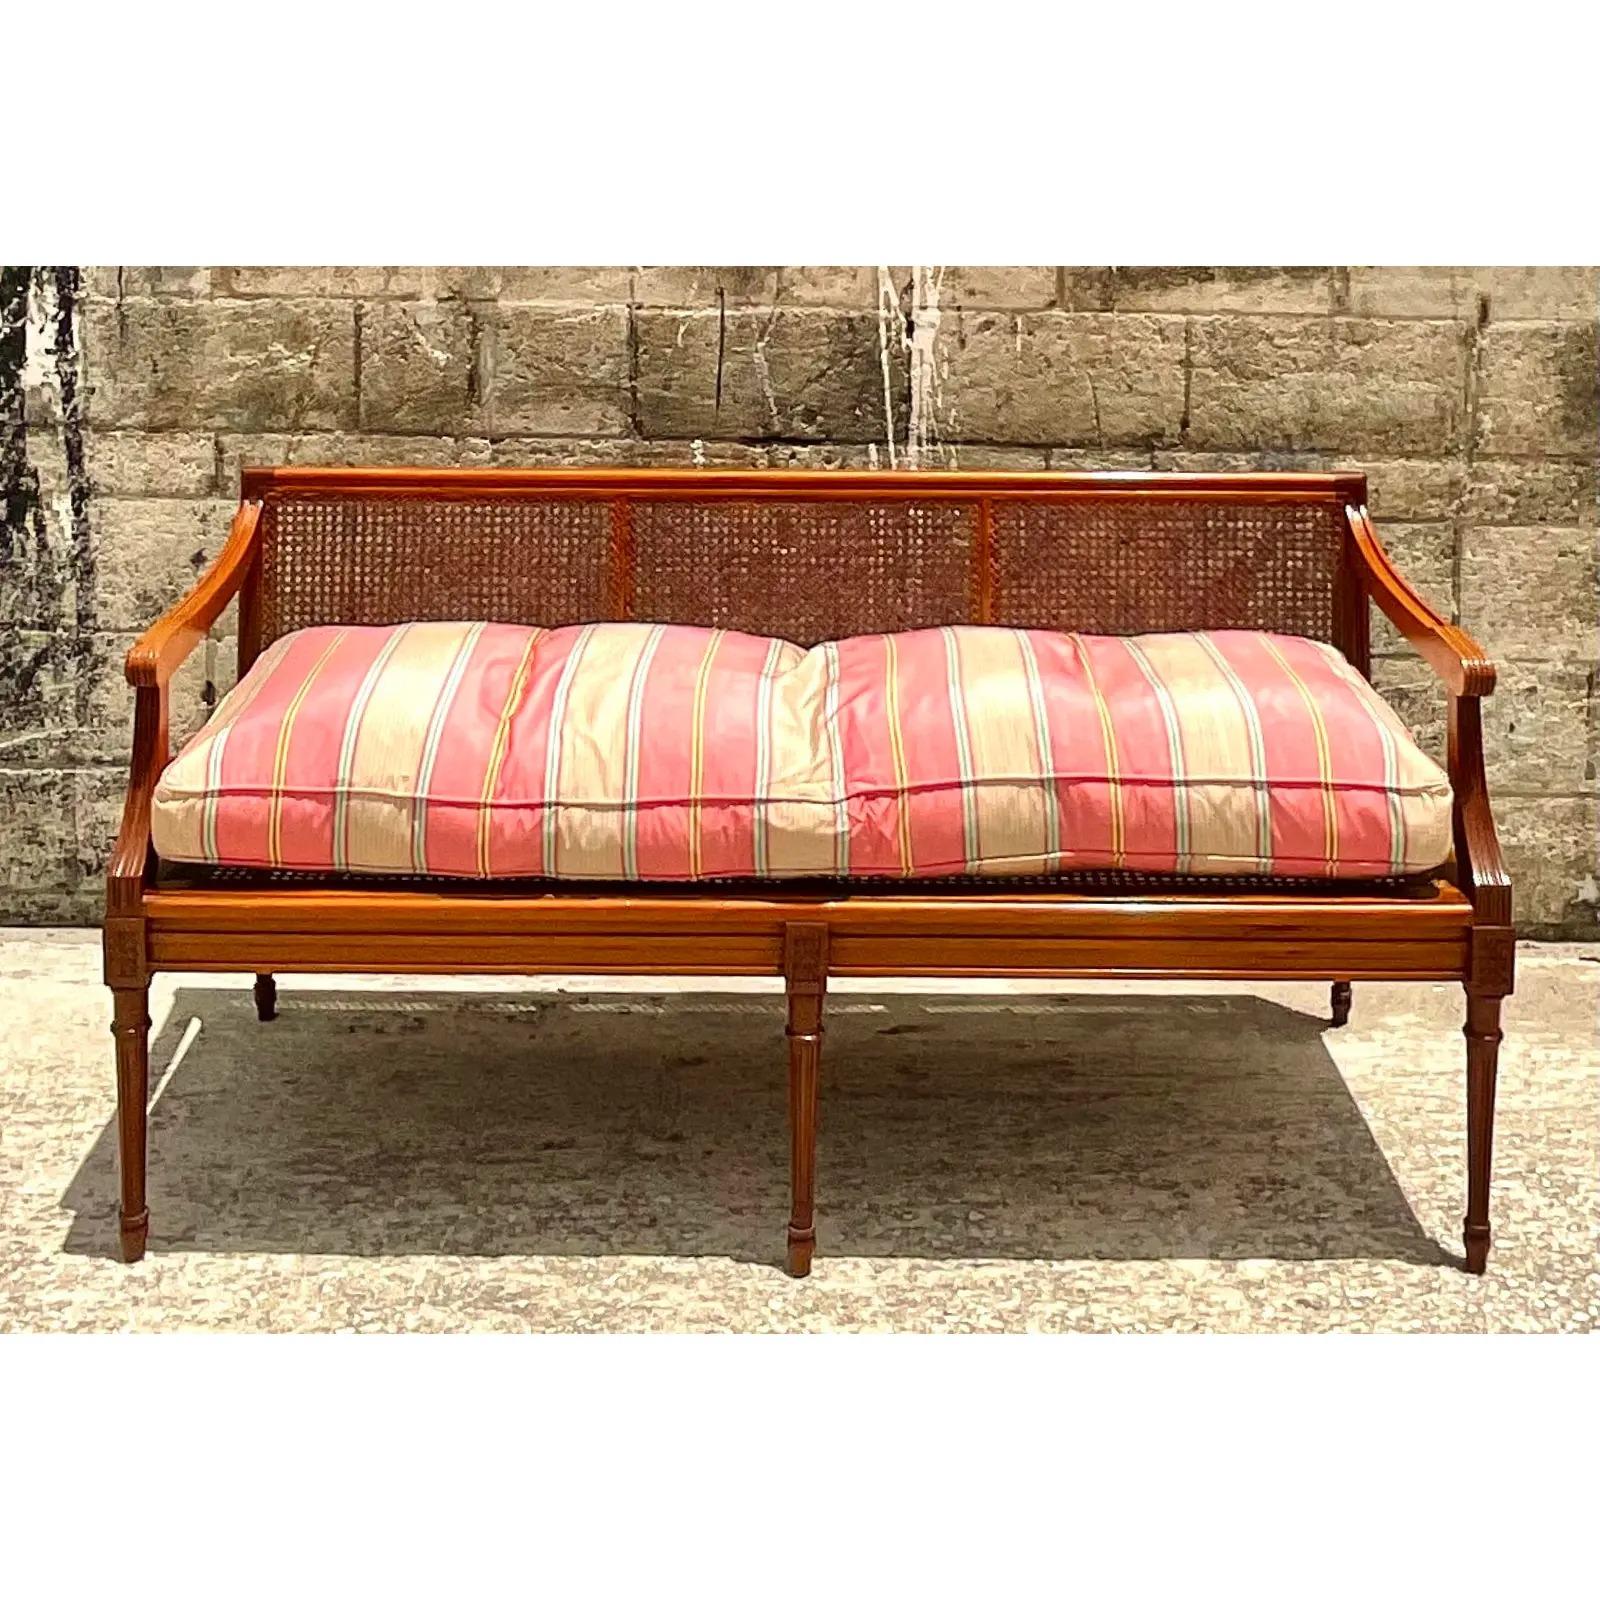 Fantastic vintage Coastal settee. A brilliant 19th Century piece in Brazilian Mahogany with inset cane panels. Gorgeous striped Colefax and Fowler Down filled cushion. Acquired from a Palm Beach estate.